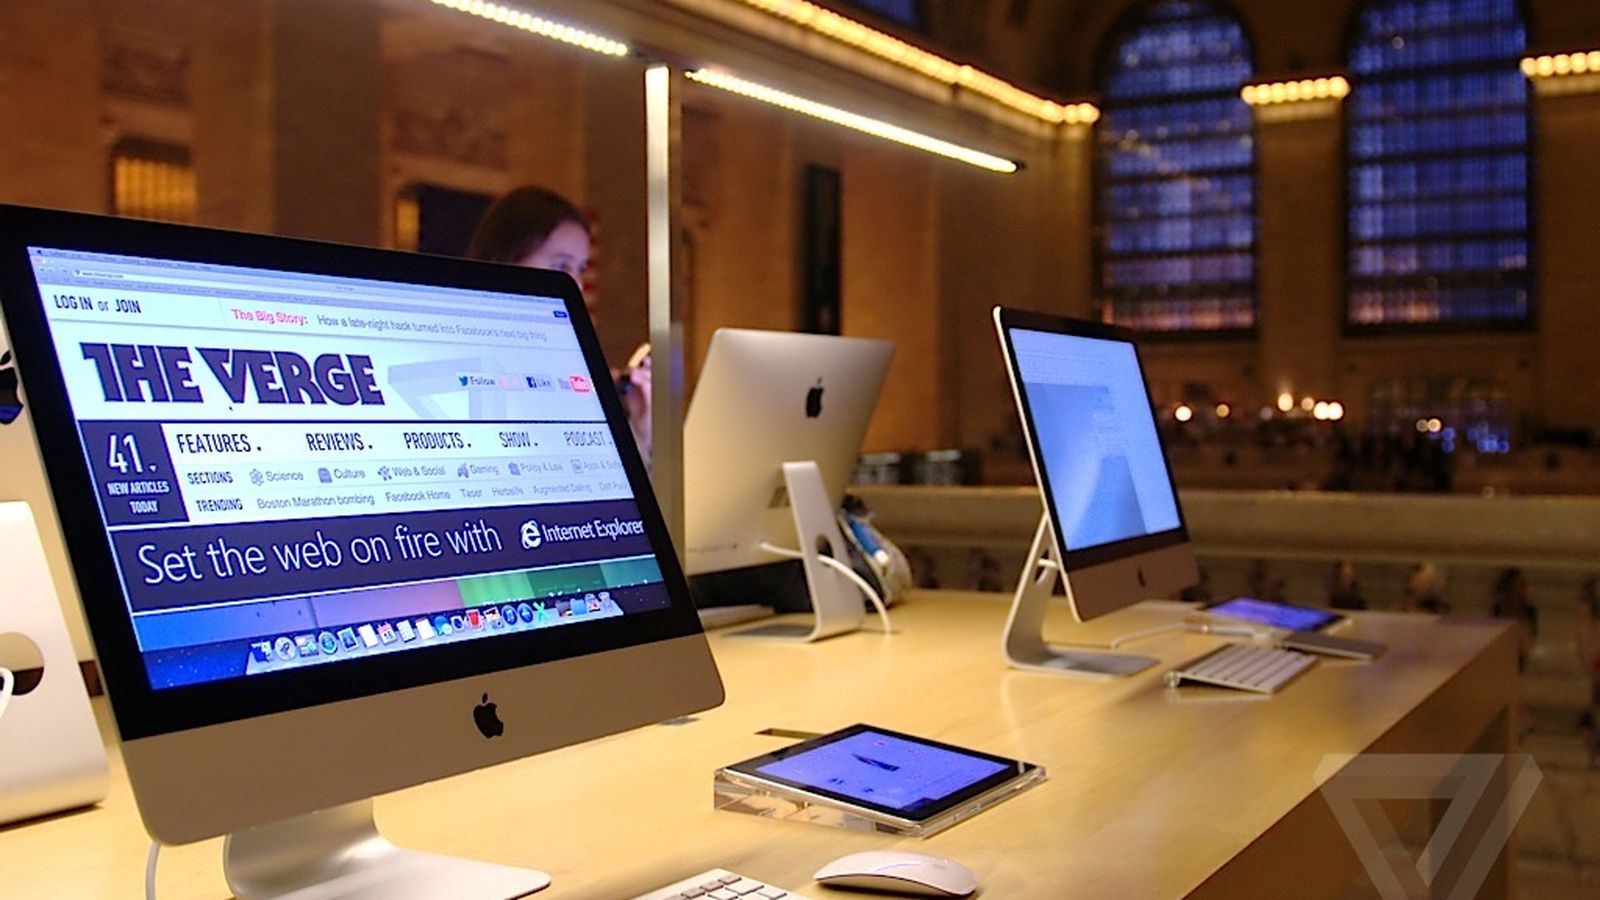 Imac mac store what is the new version of apple macbook pro